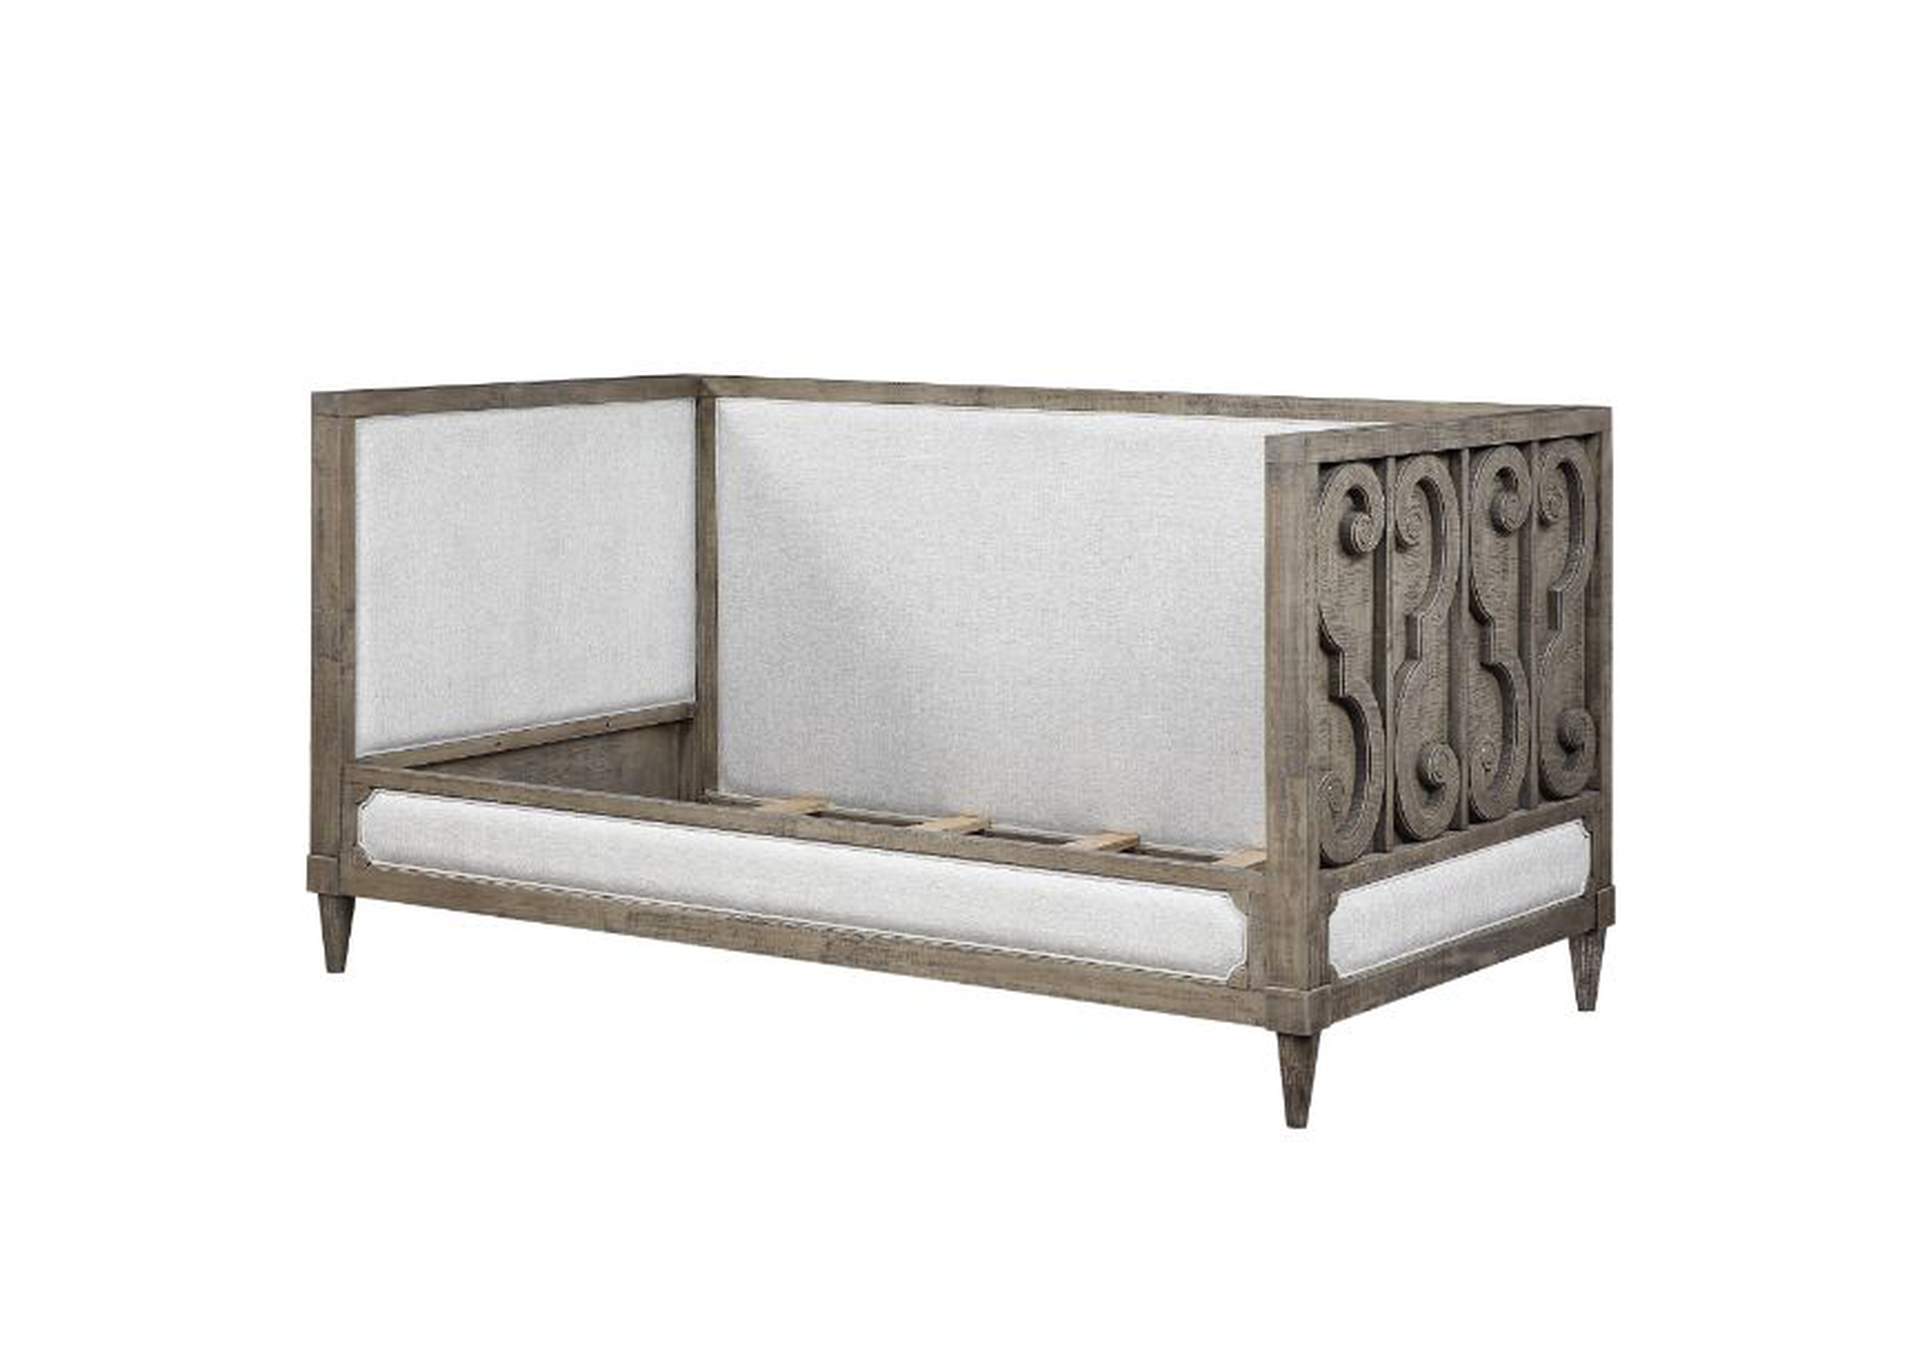 Artesia Daybed,Acme